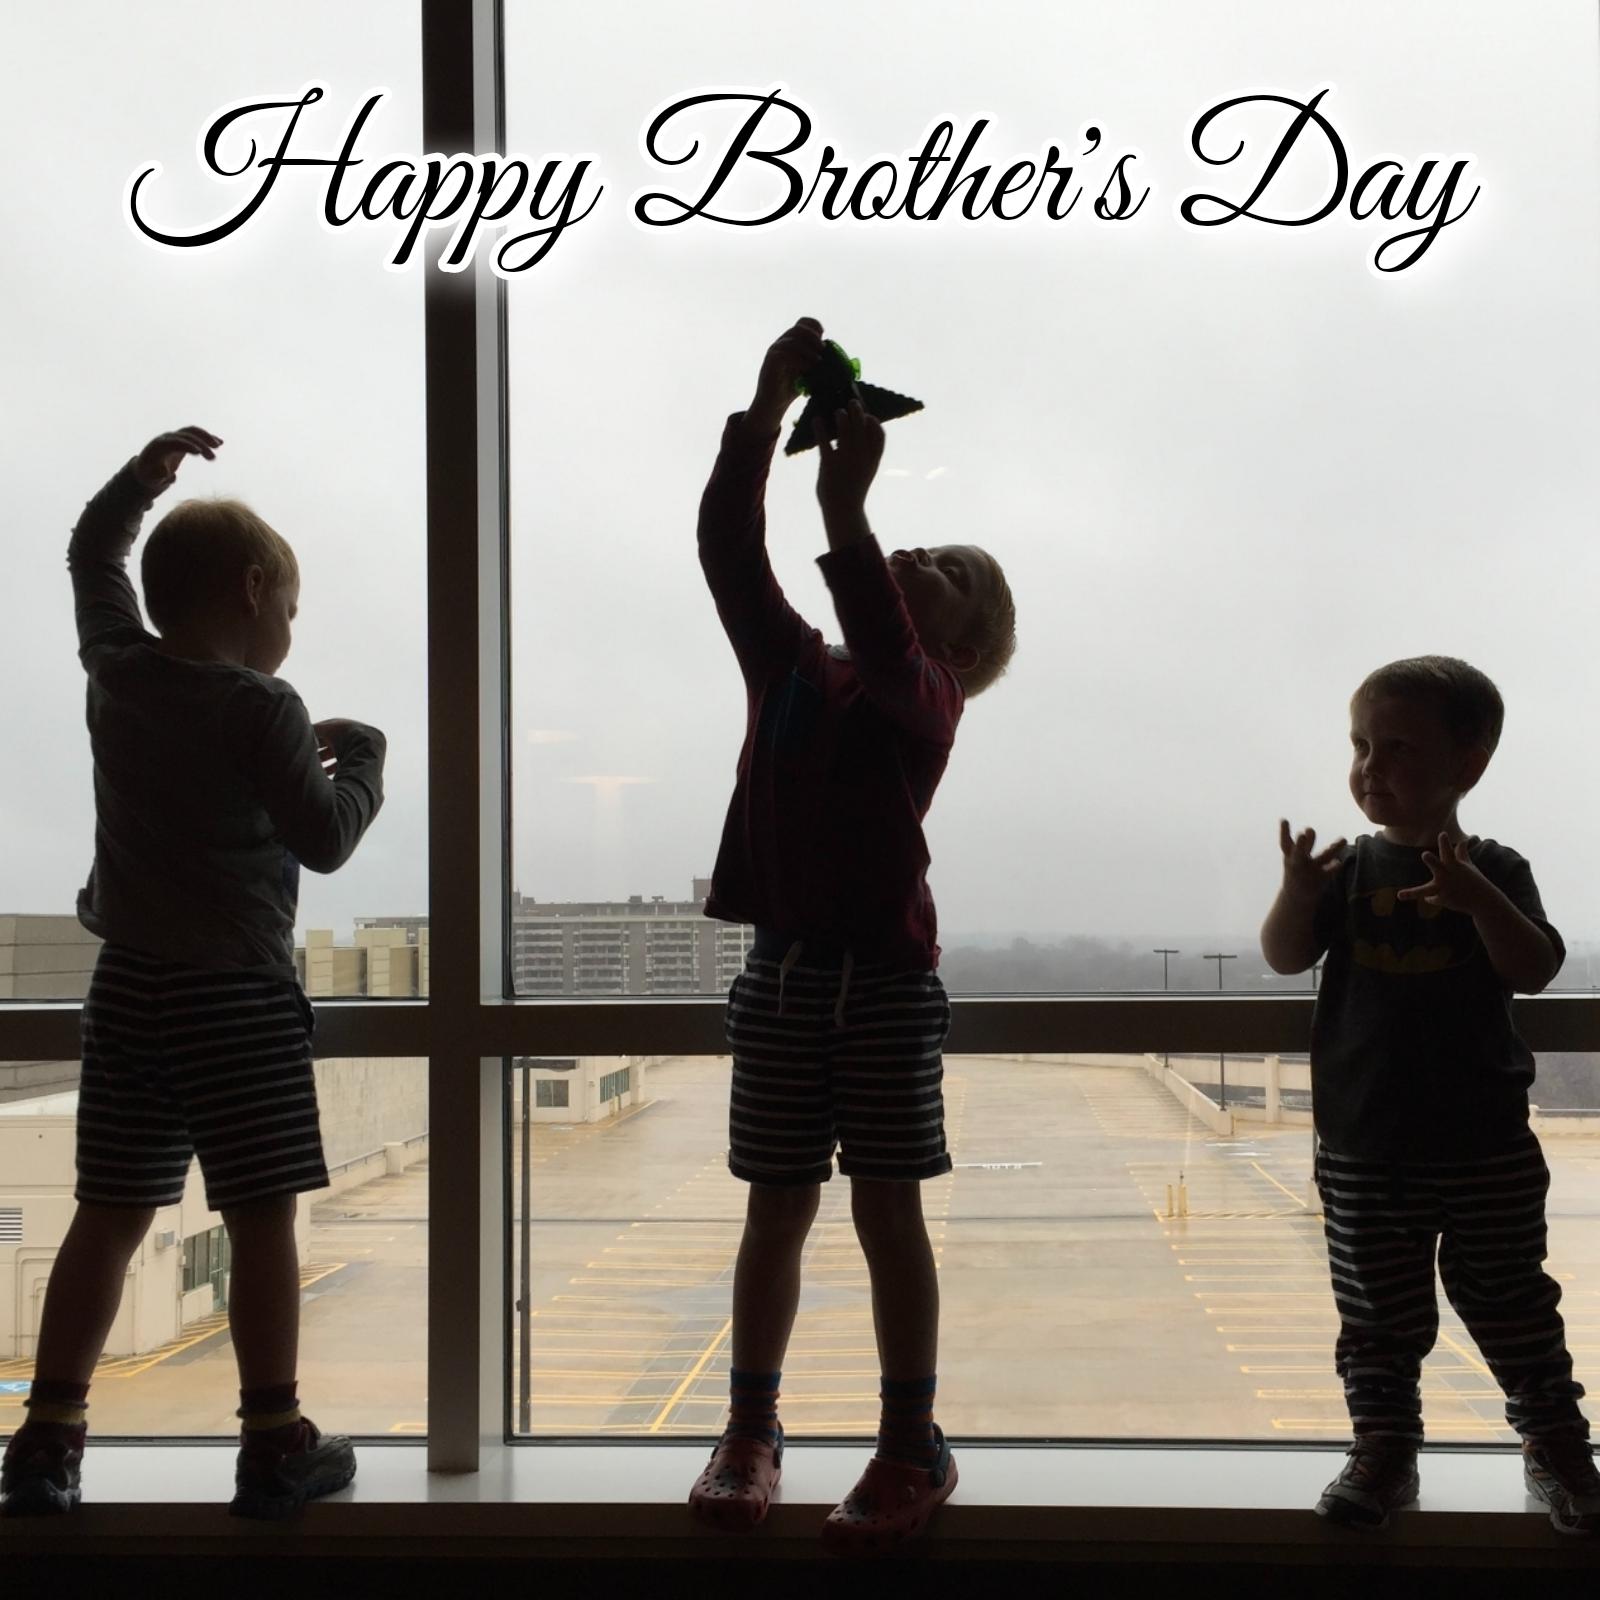 Happy Brothers Day Wishes Messages  Quotes  WishesMsg